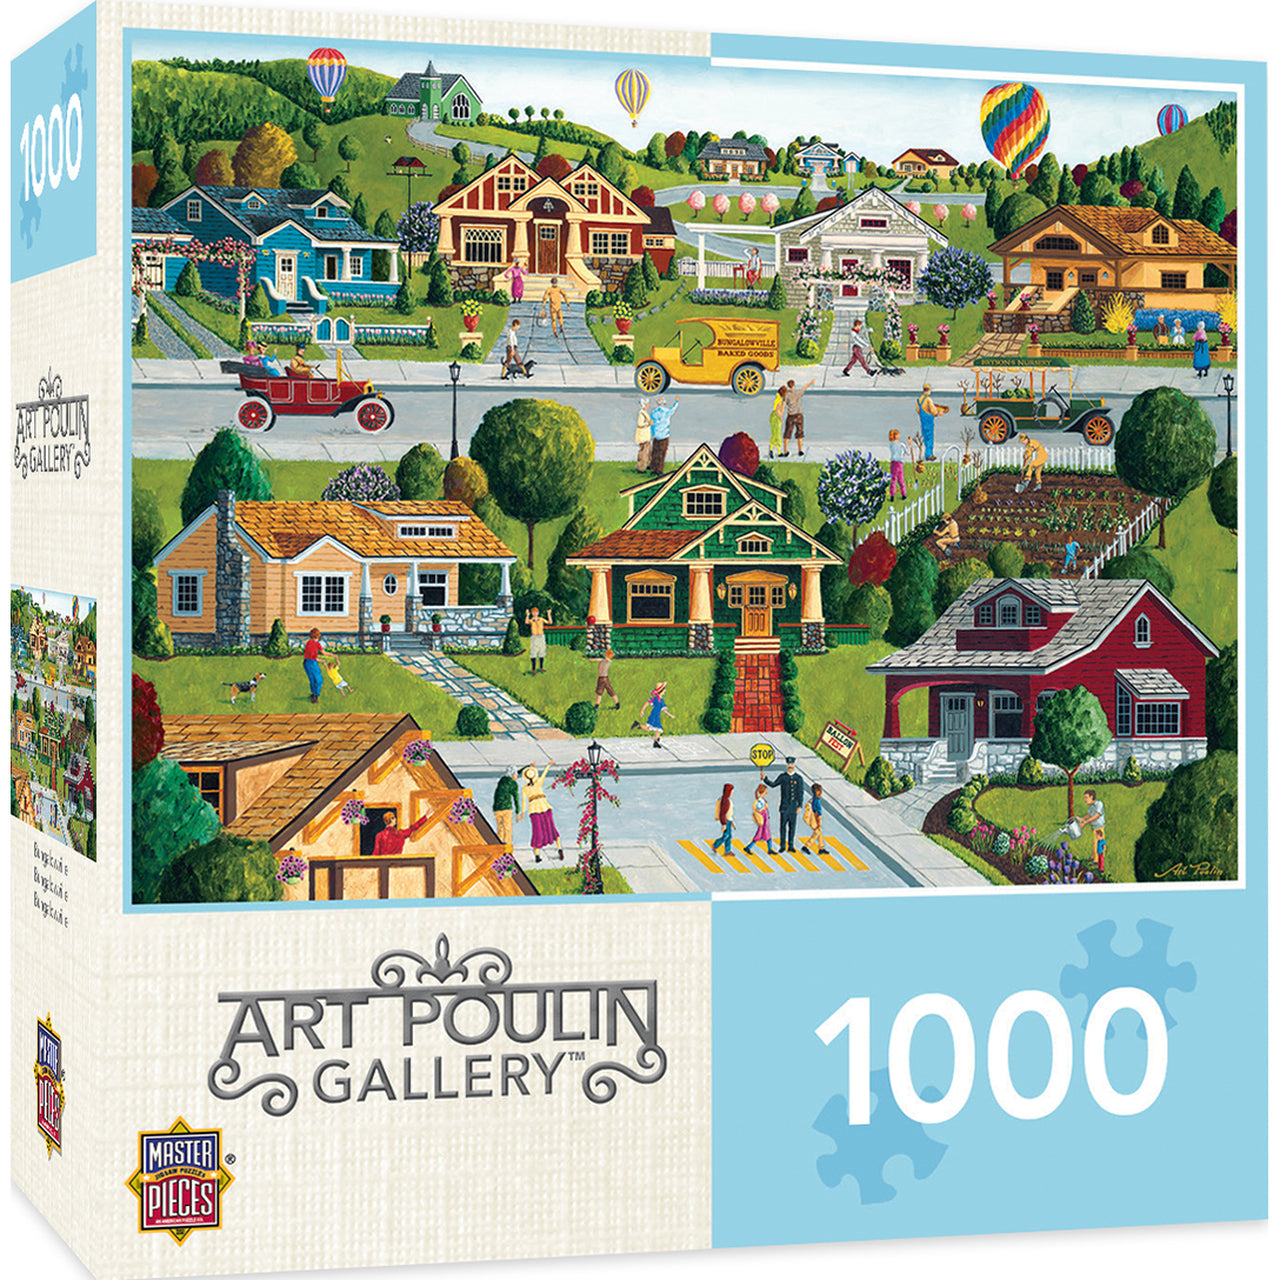 Hometown Gallery - Bungalowville 1000 Piece Jigsaw Puzzle by MasterPieces